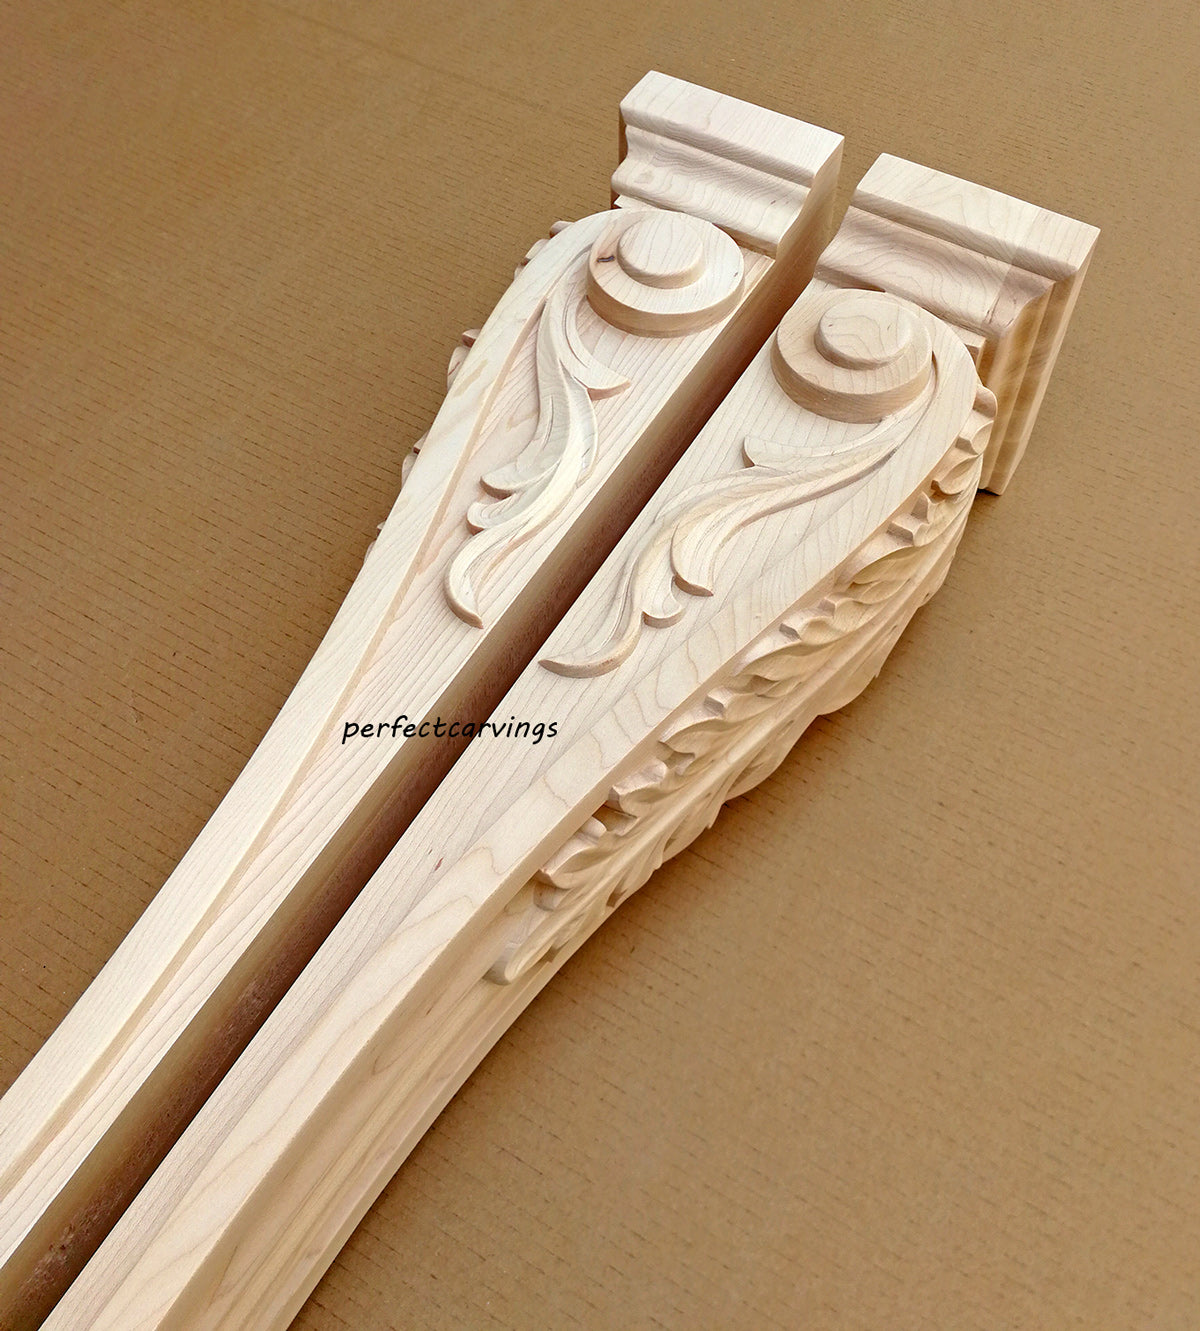 PAIR of ISP-14 Acanthus Carved 35